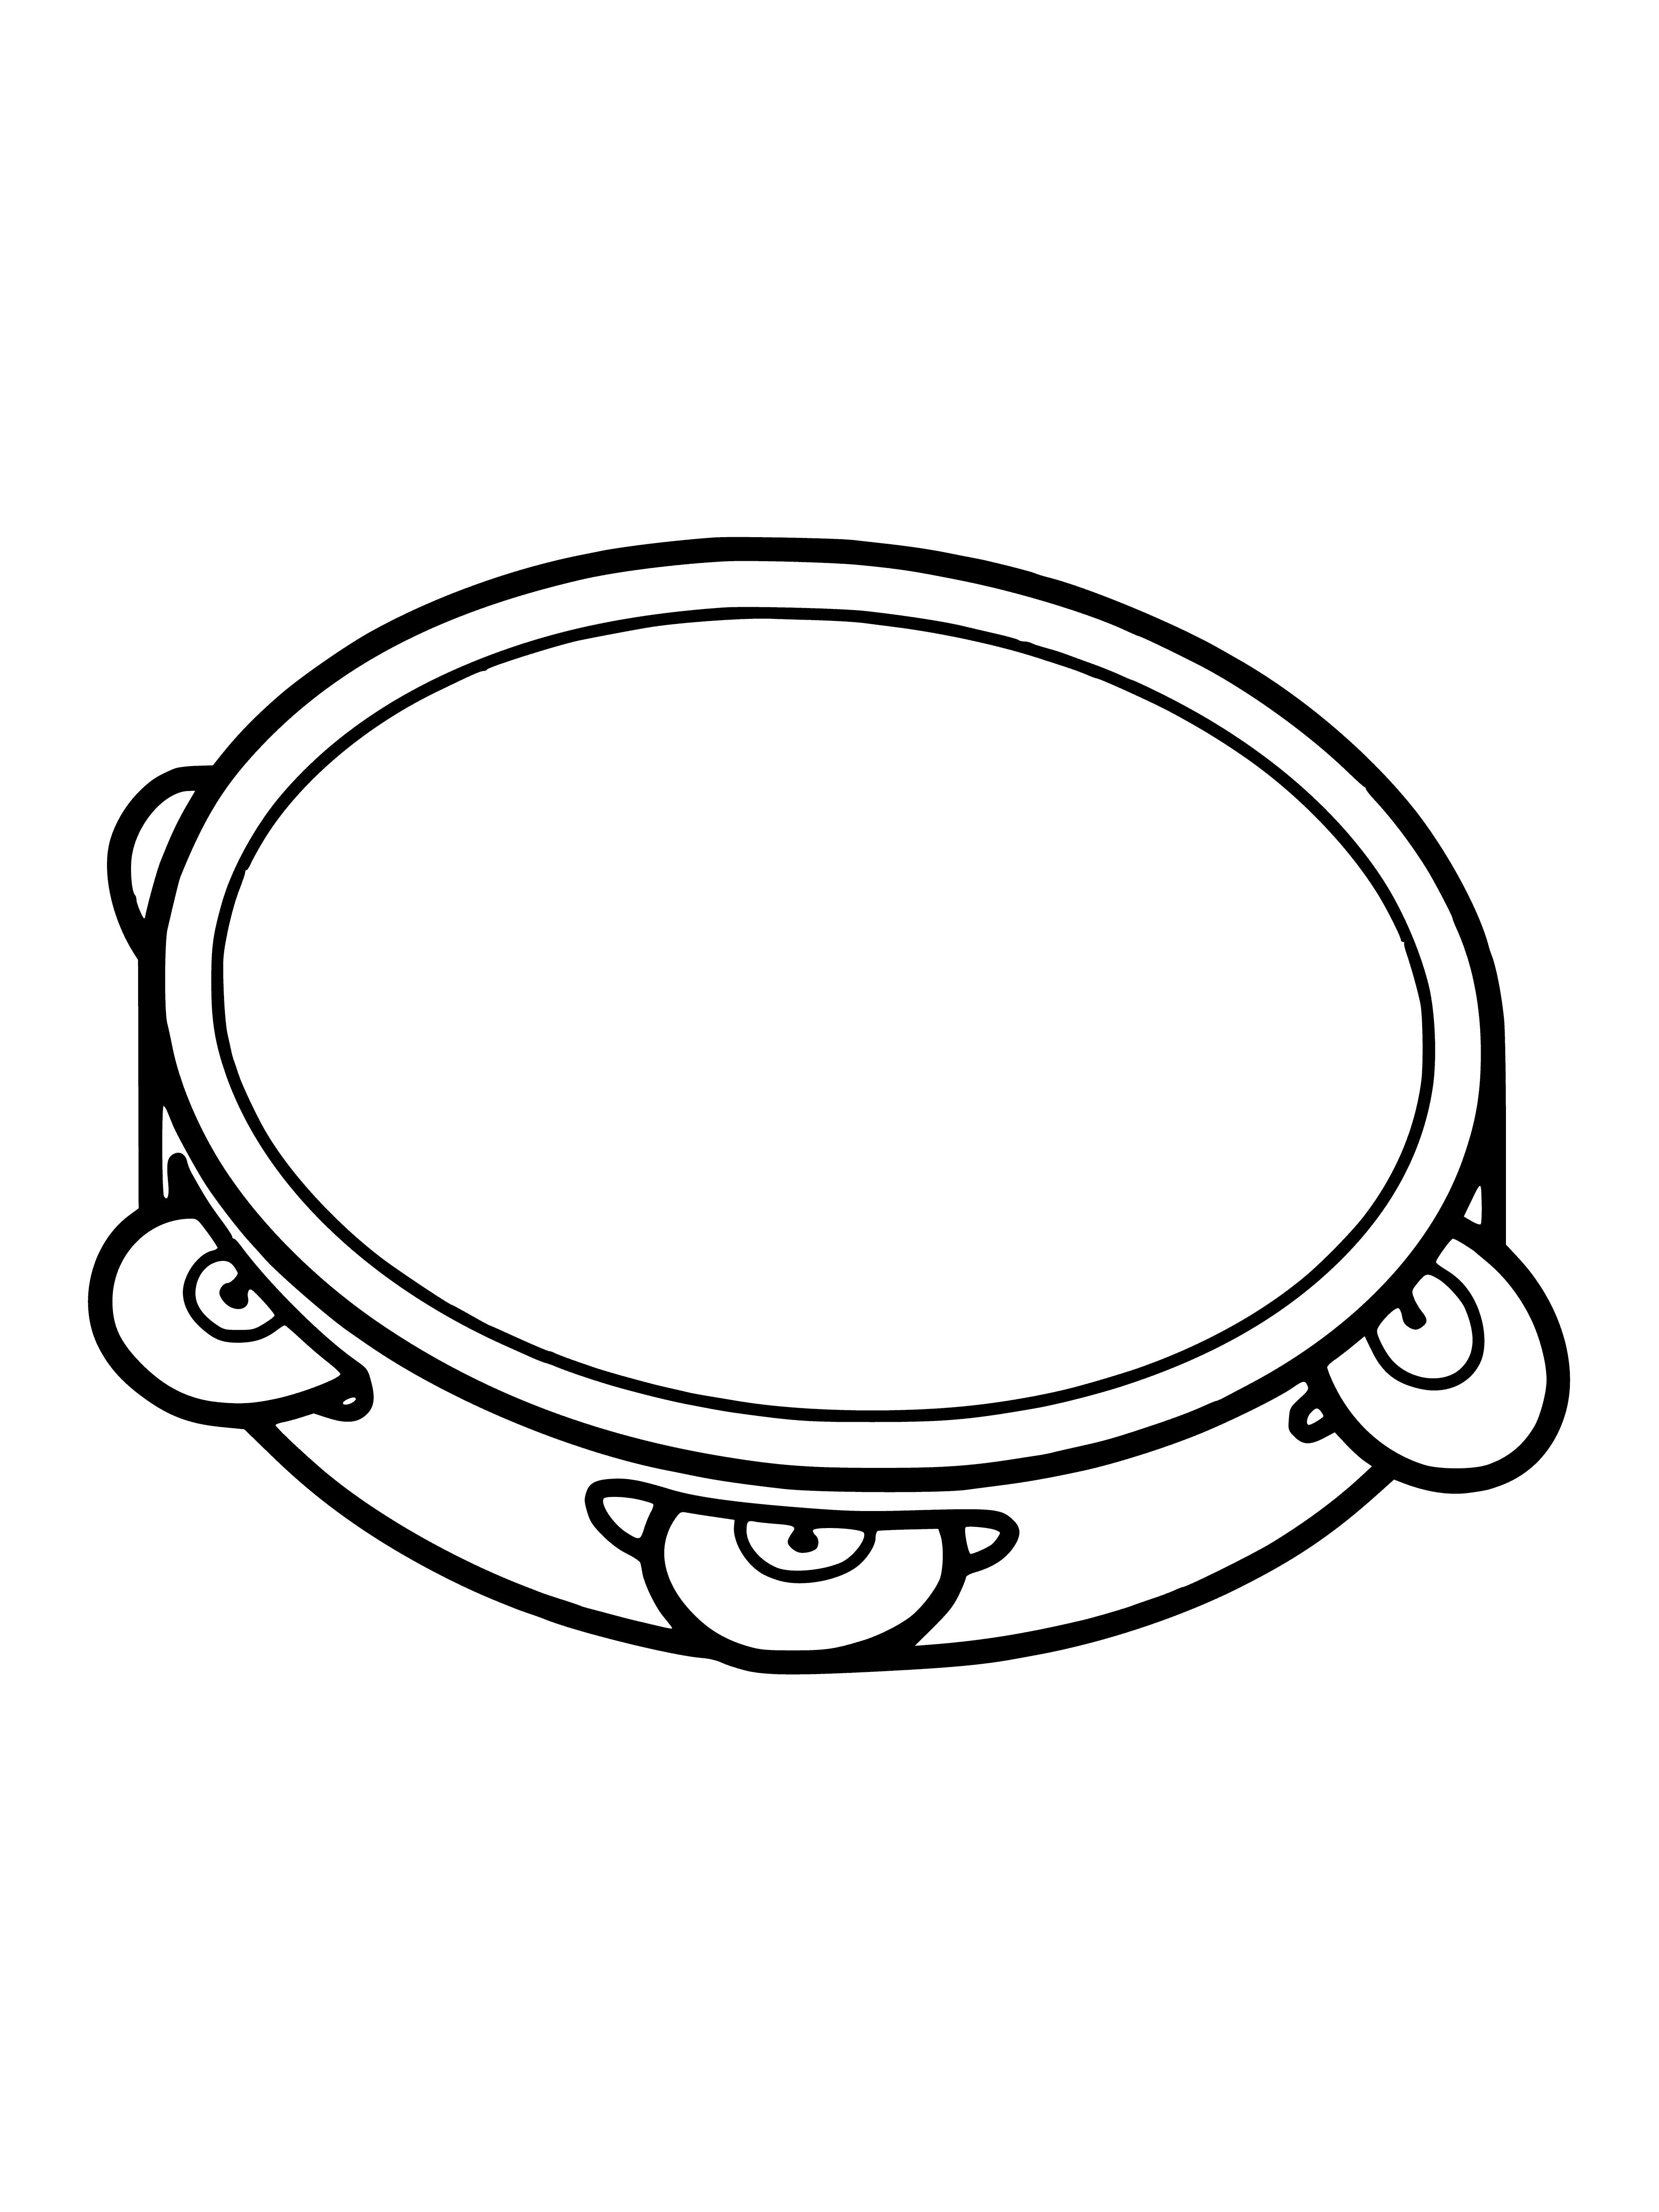 coloring page: Small percussion instrument with a circular frame and skin. Can be struck, plucked or strummed to make sound. #instrument #tambourine